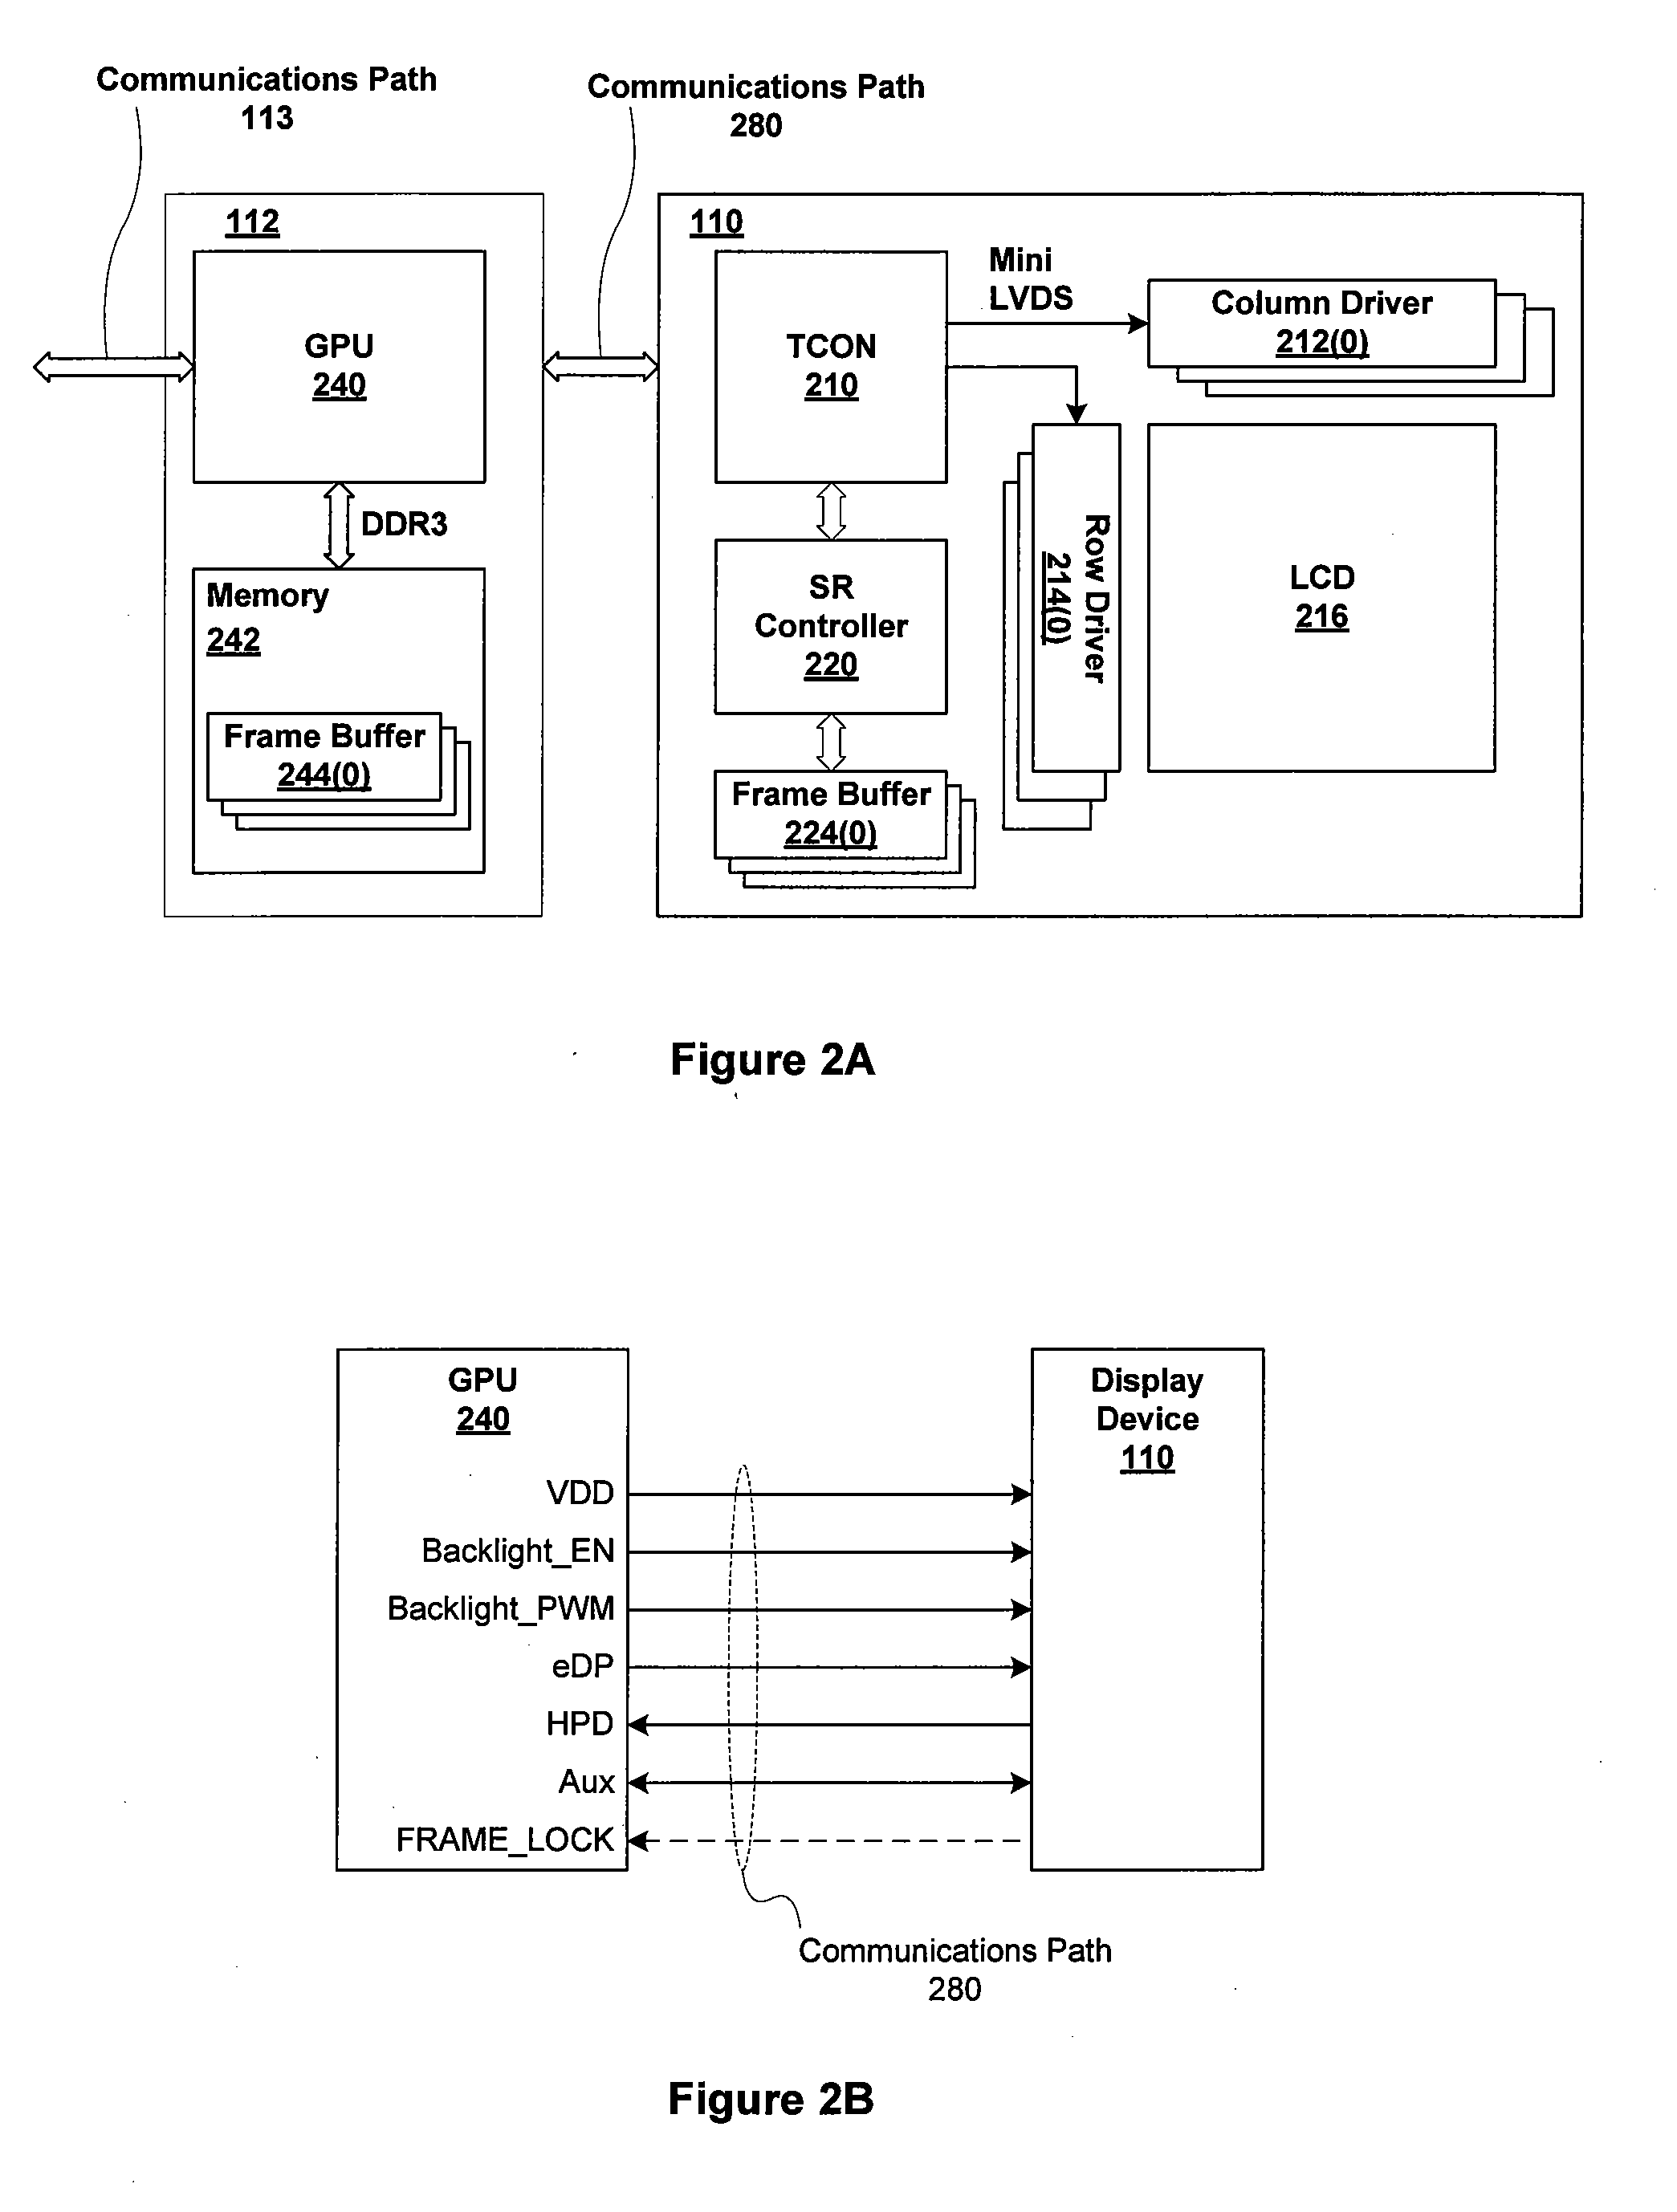 Method and apparatus for controlling sparse refresh of a self-refreshing display device coupled to a graphics controller